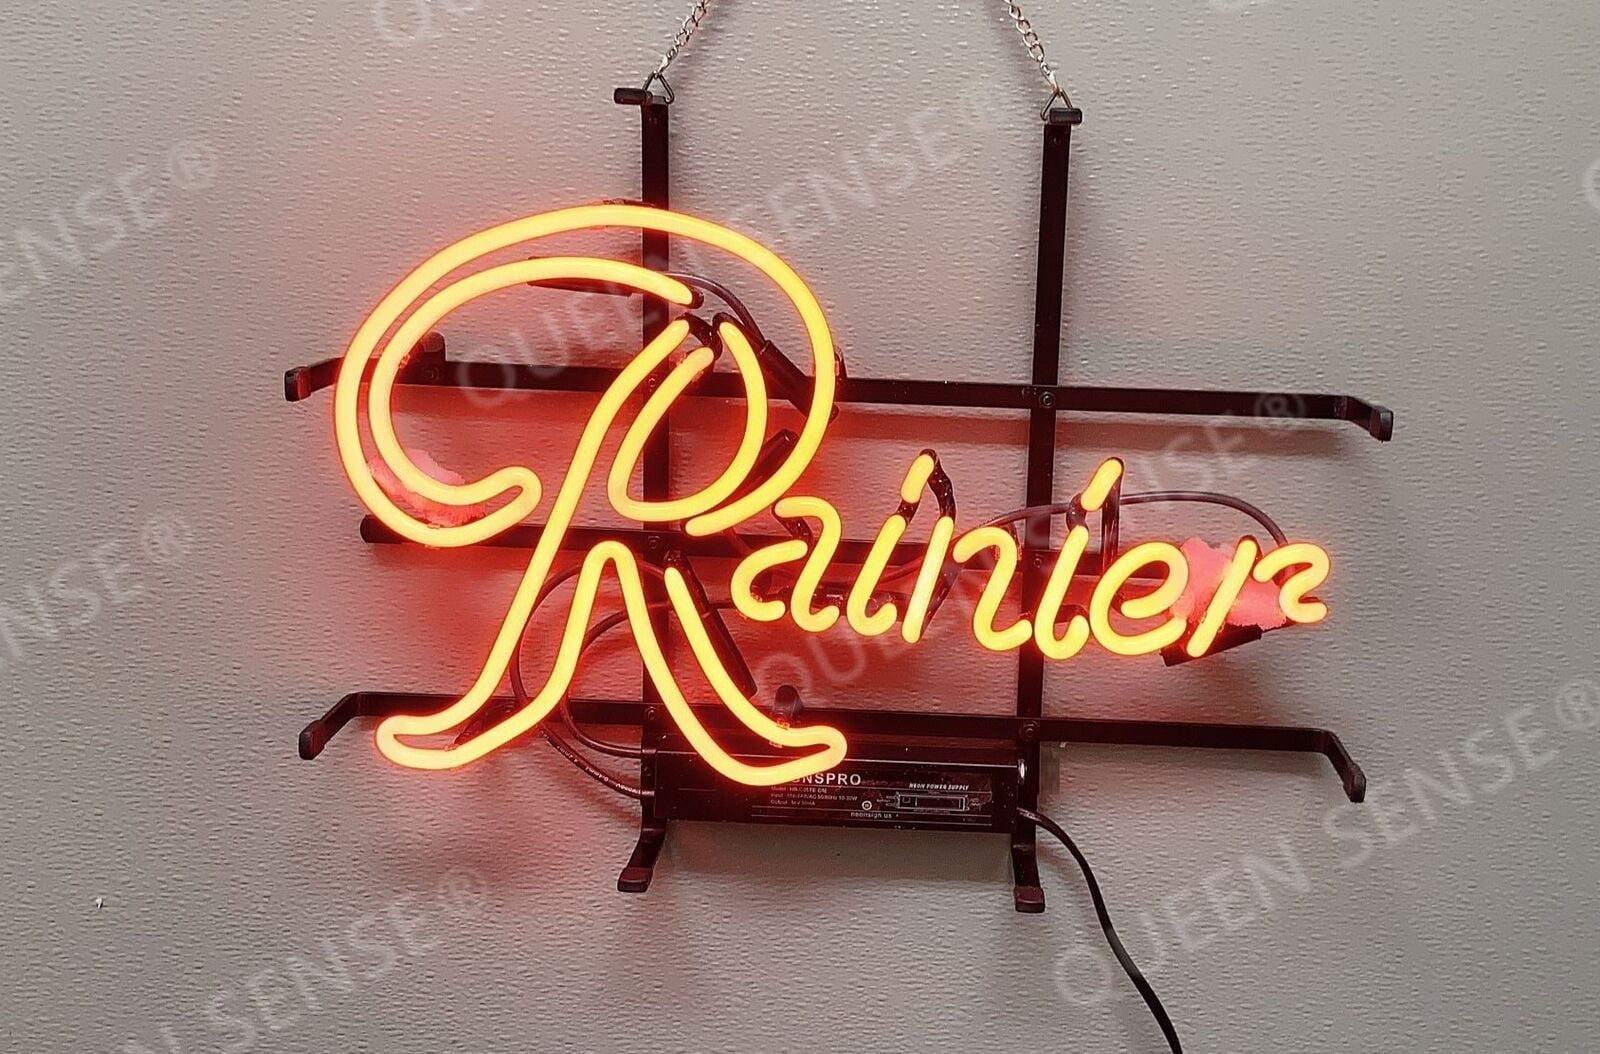 New Route 66 Beer Neon Sign 20"x16" 